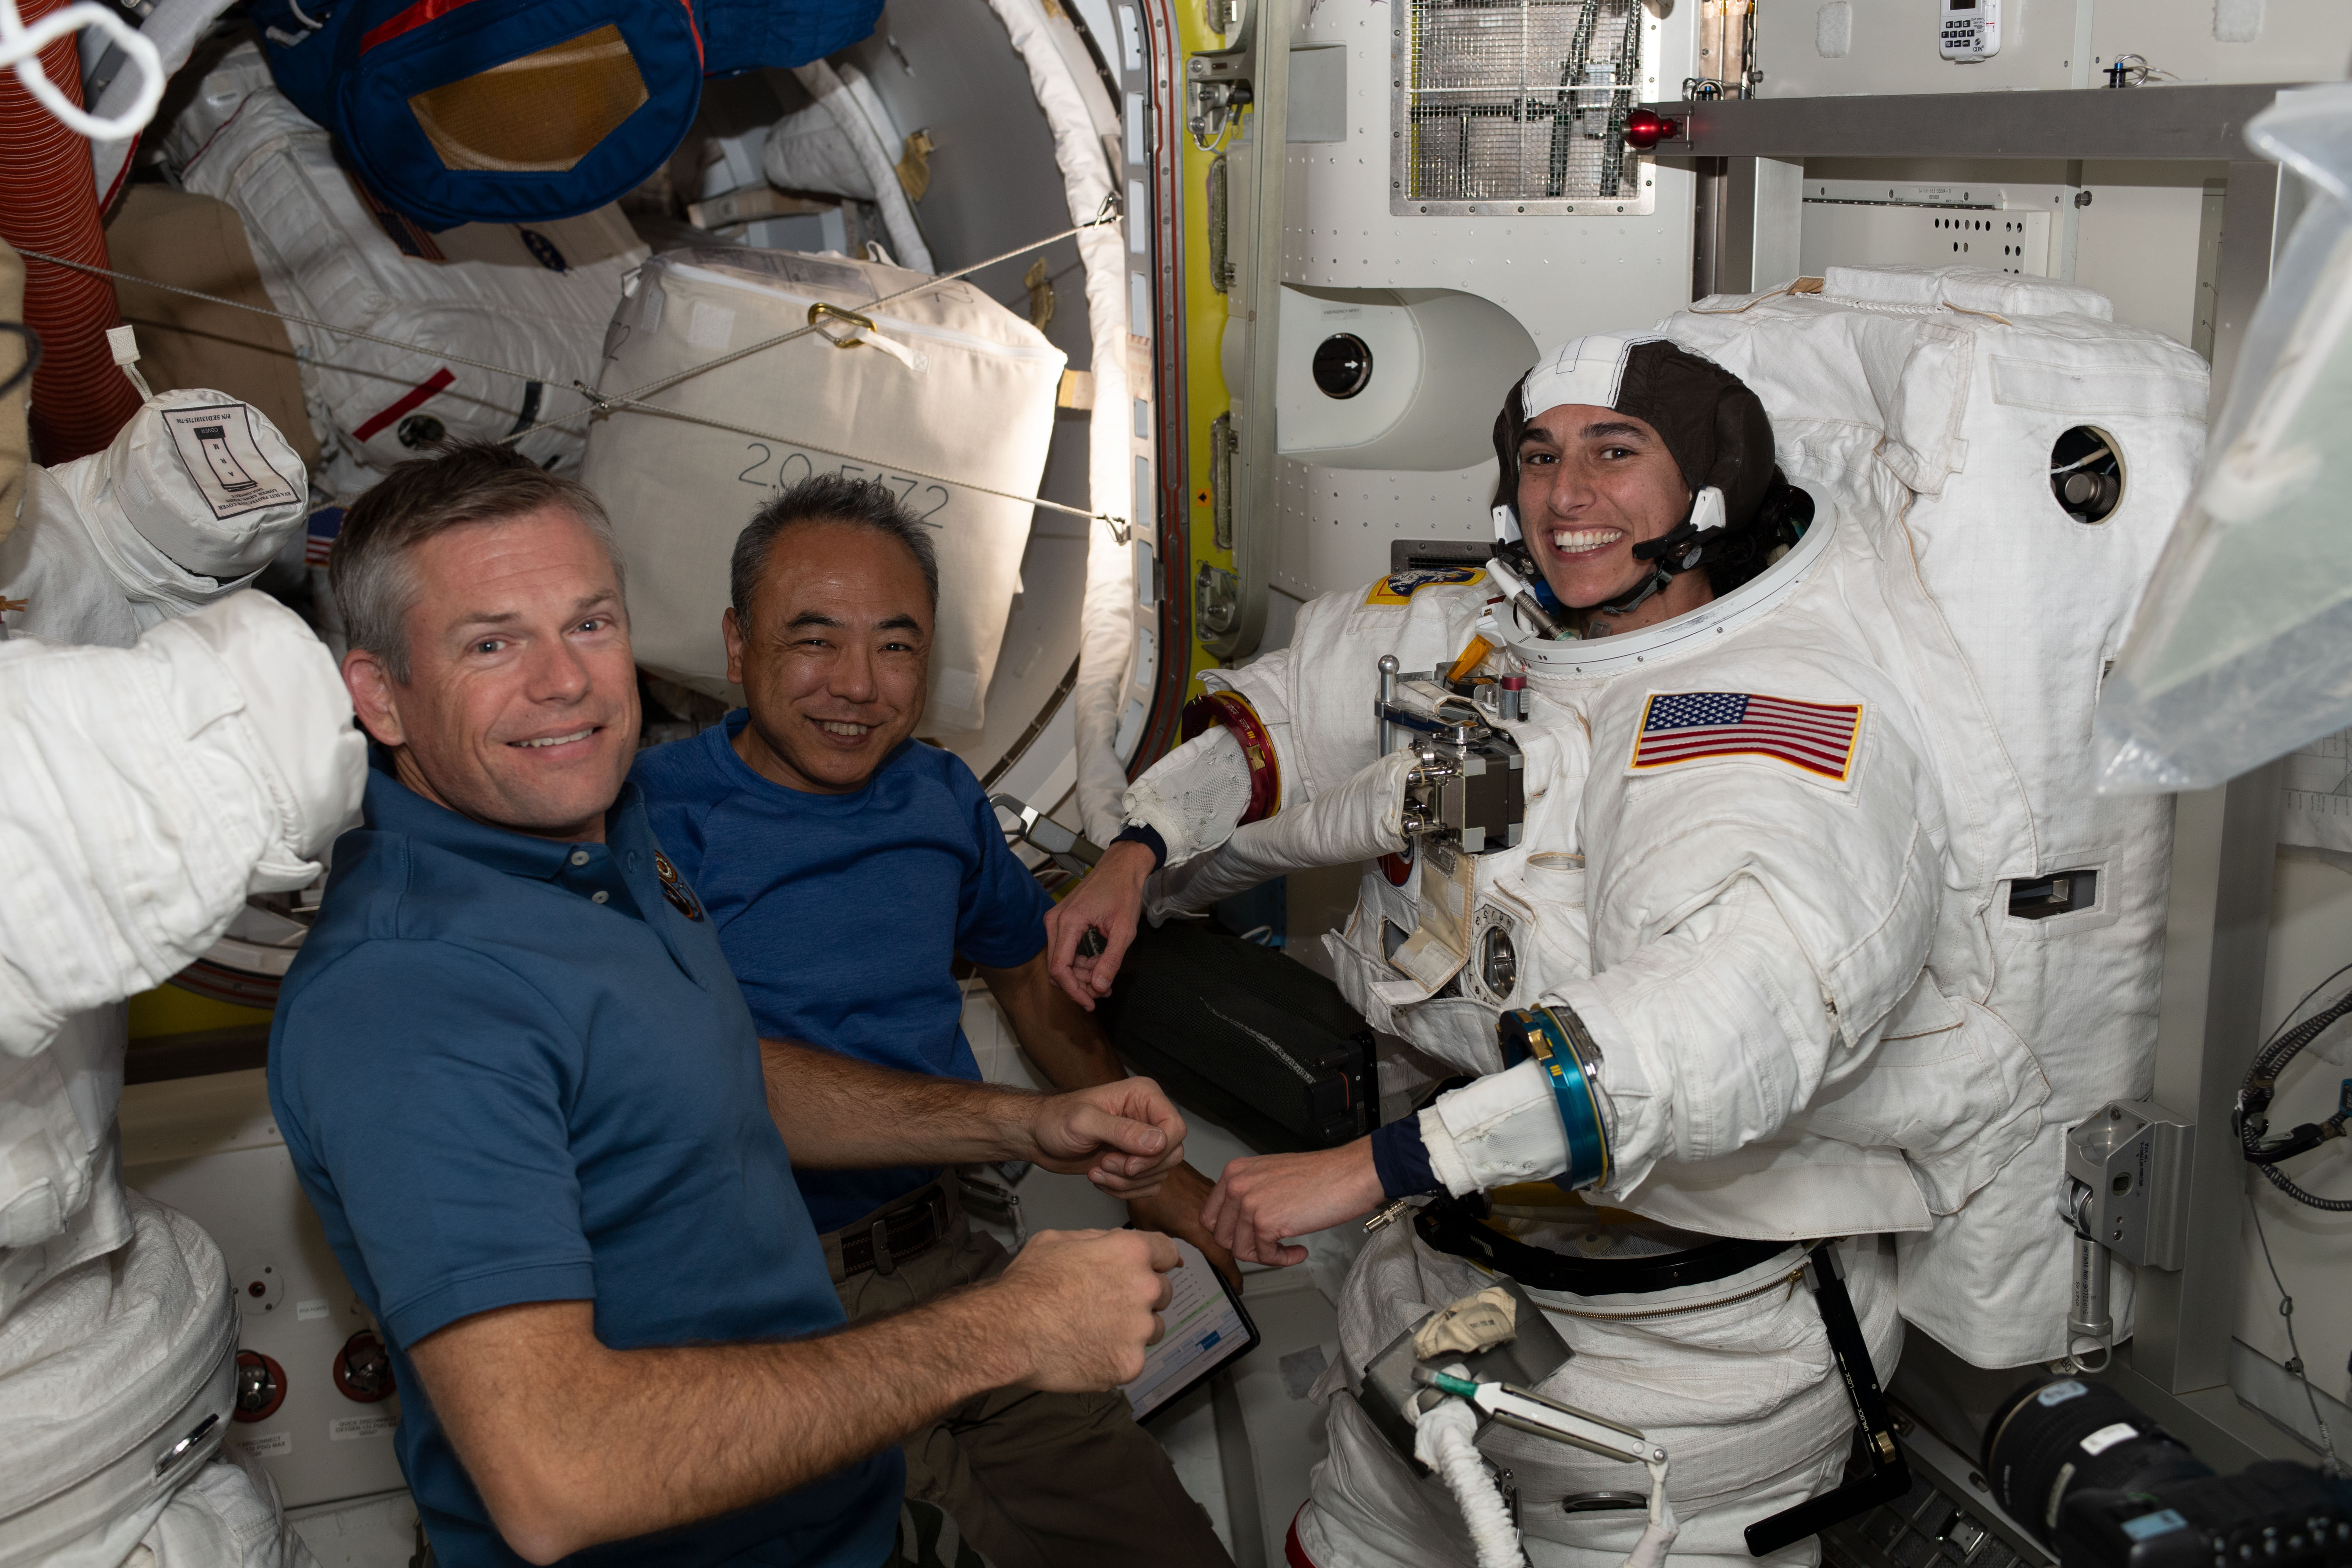 (From left) Astronauts Andreas Mogensen from ESA (European Space Agency) and Satoshi Furukawa from JAXA (Japan Aerospace Exploration Agency) assist NASA astronaut Jasmin Moghbeli as she tries on her spacesuit and tests its components aboard the International Space Station's Quest airlock in preparation for an upcoming spacewalk.